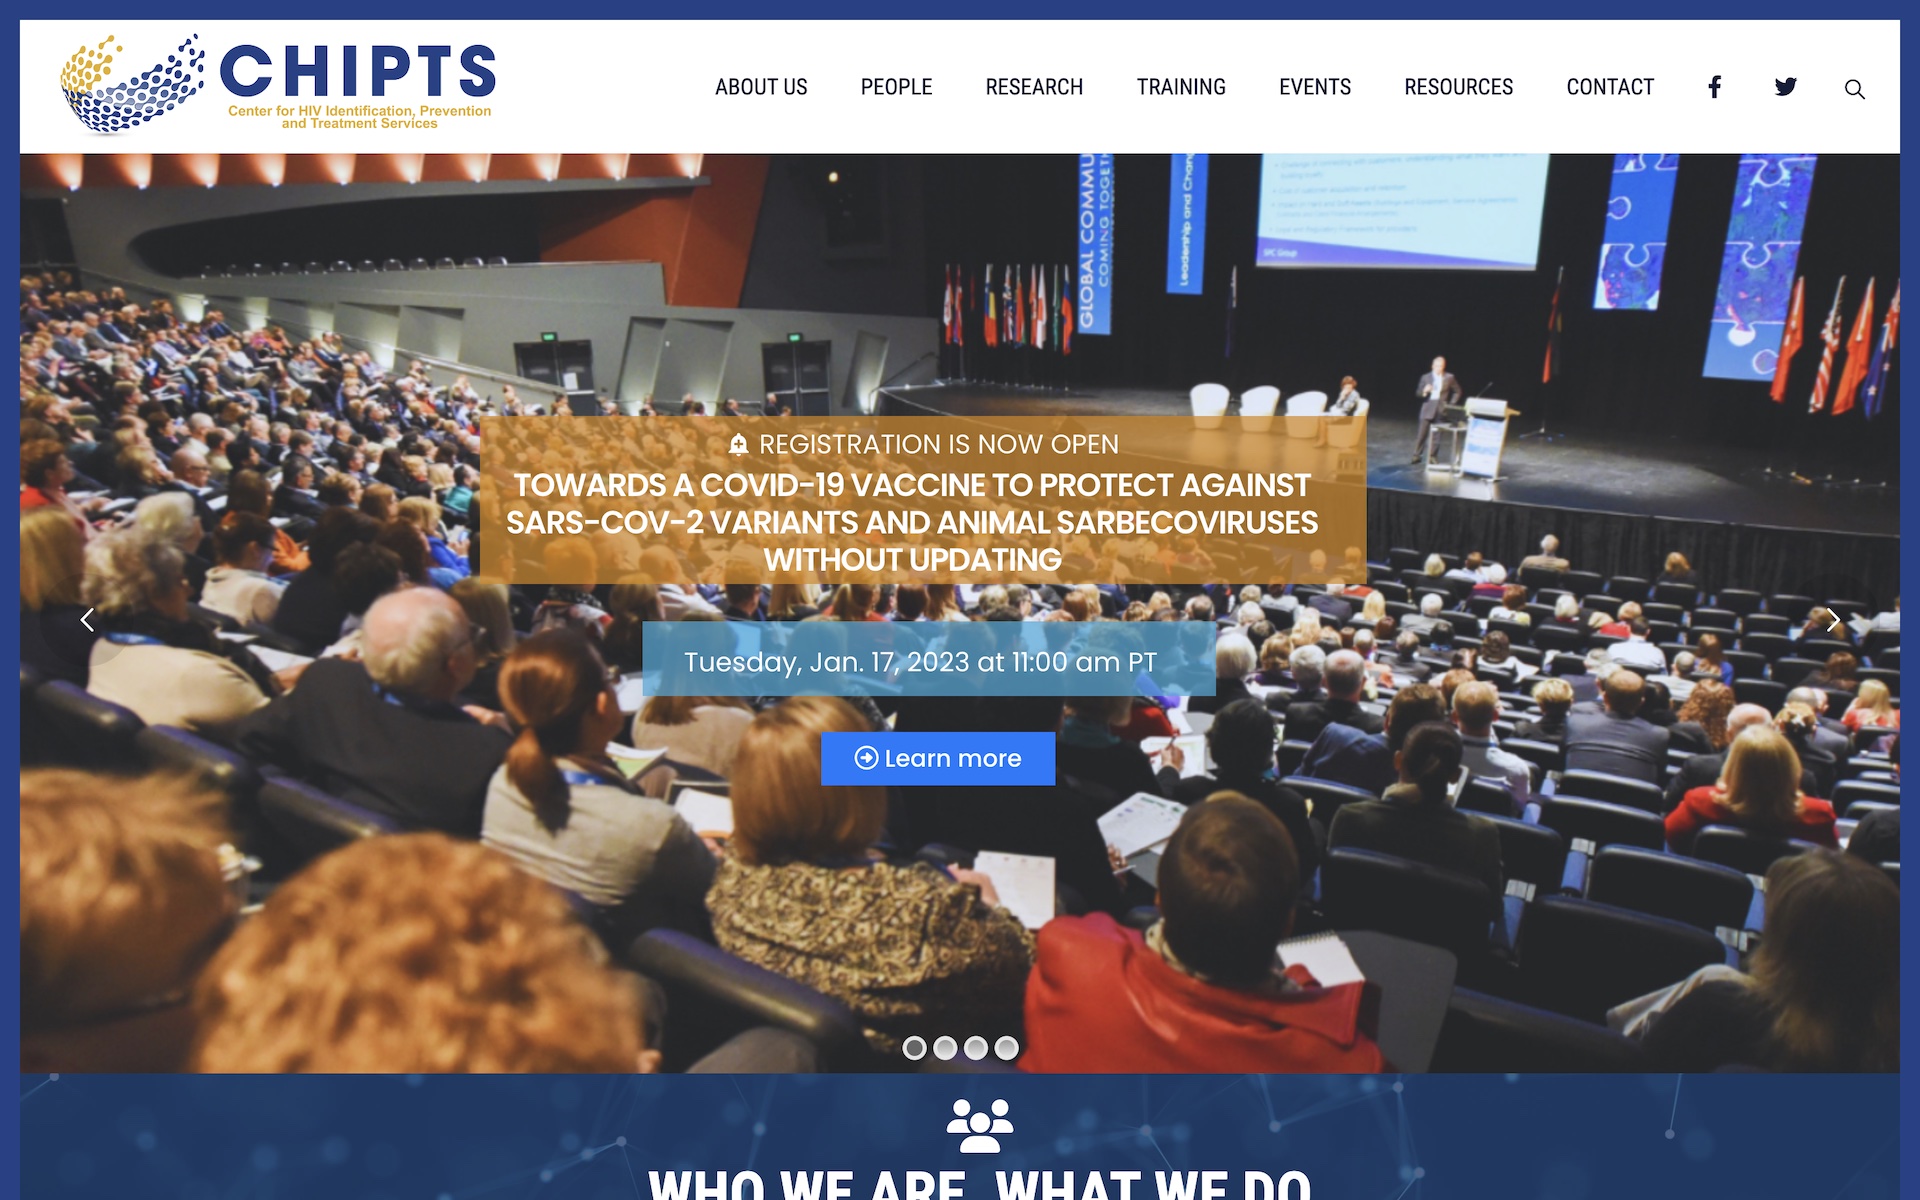 CHIPTS Website Page Screenshot